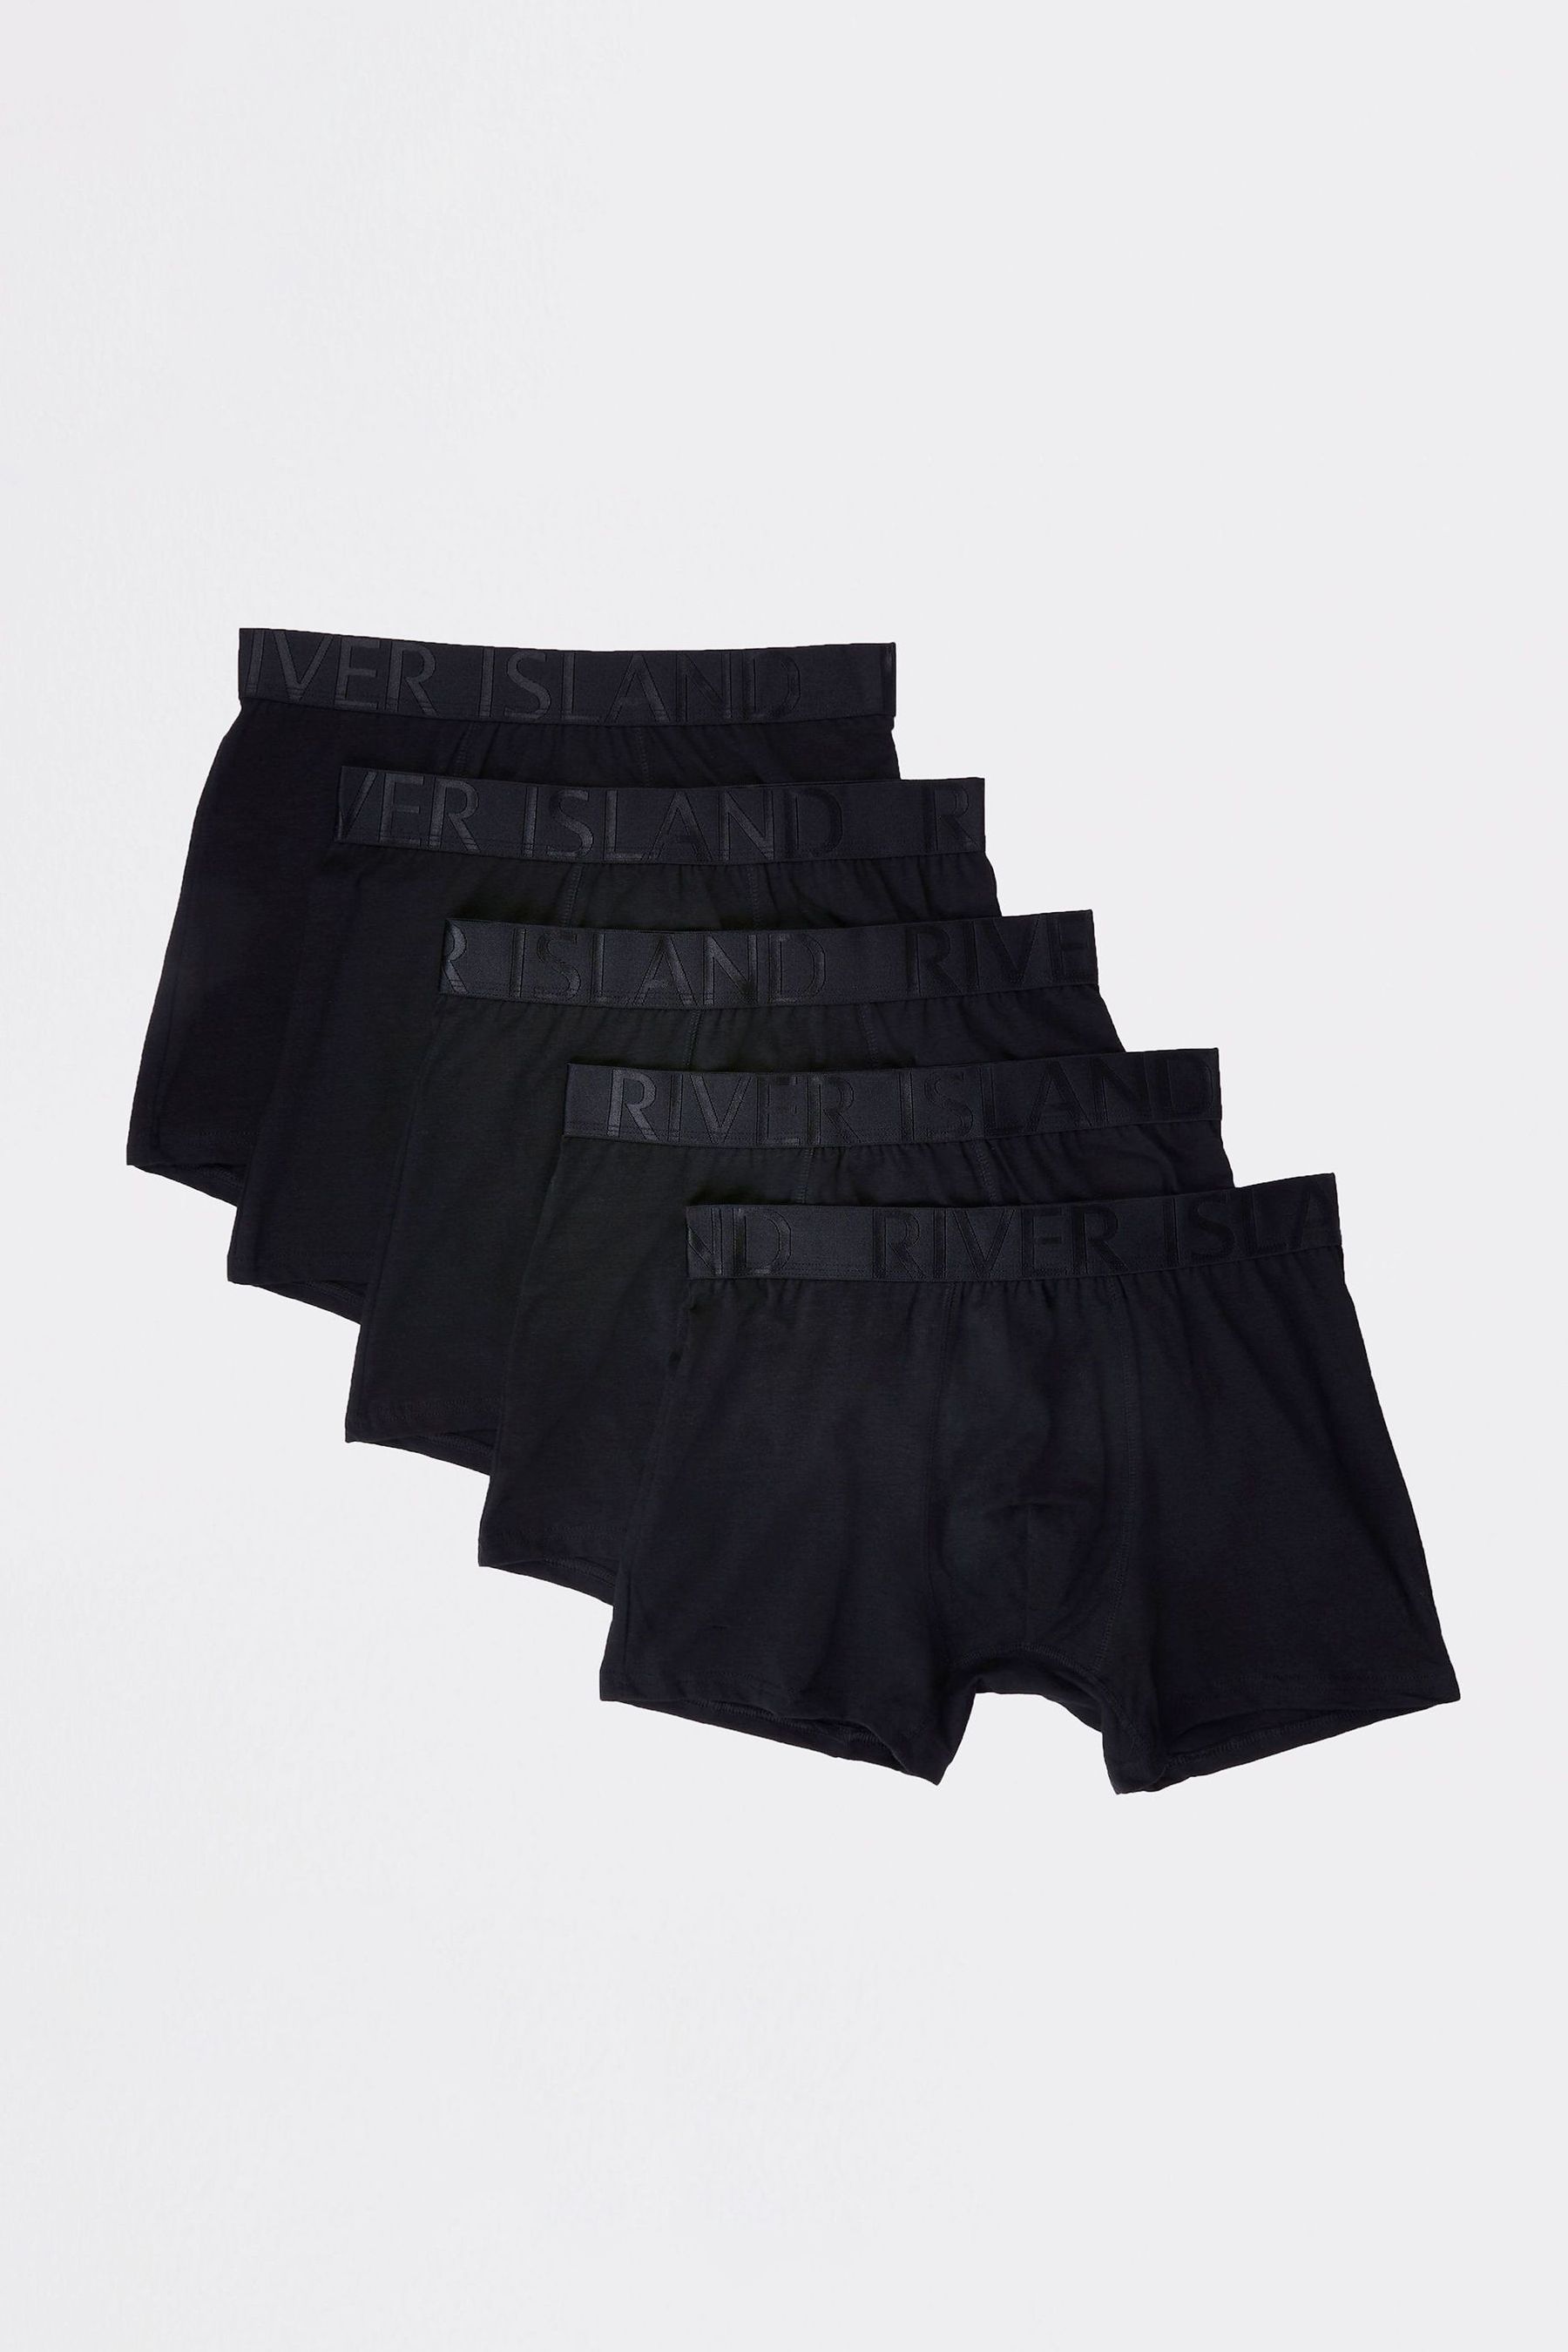 Buy River Island Black Trunks from the Next UK online shop